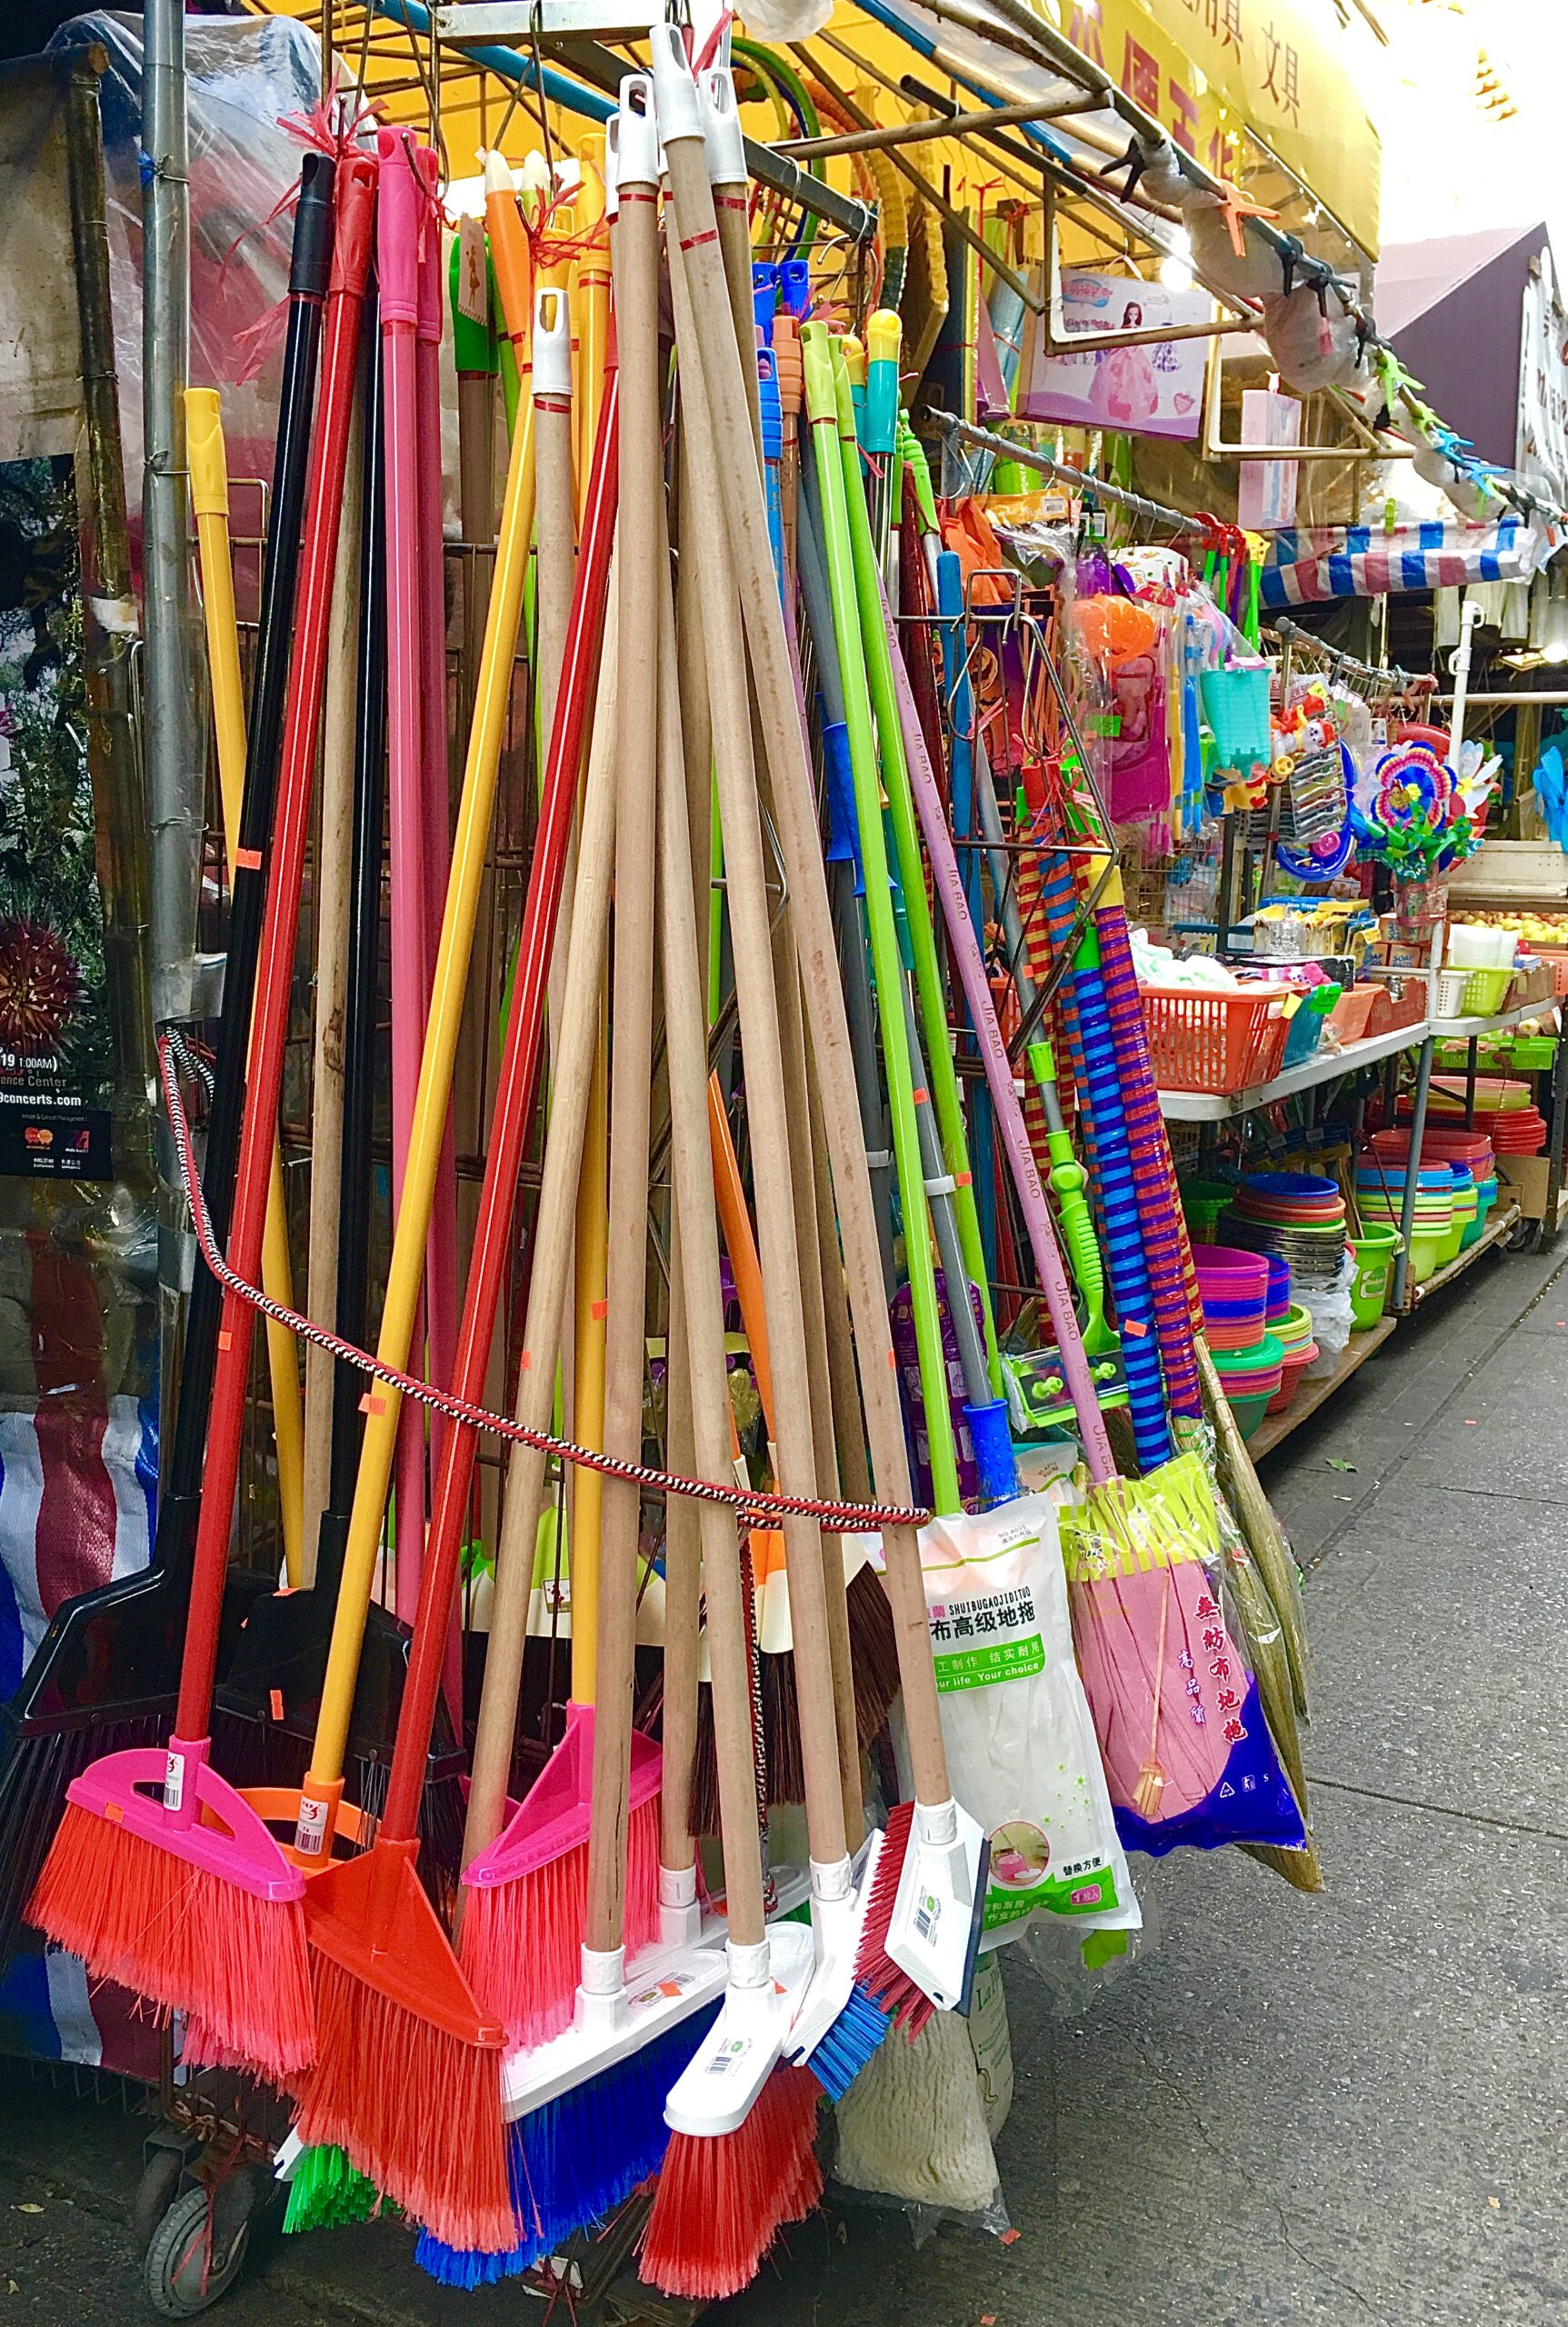 Colorful brooms are for sale at Xiang He Inc. on 86th Street in Bensonhurst. Eagle photo by Lore Croghan